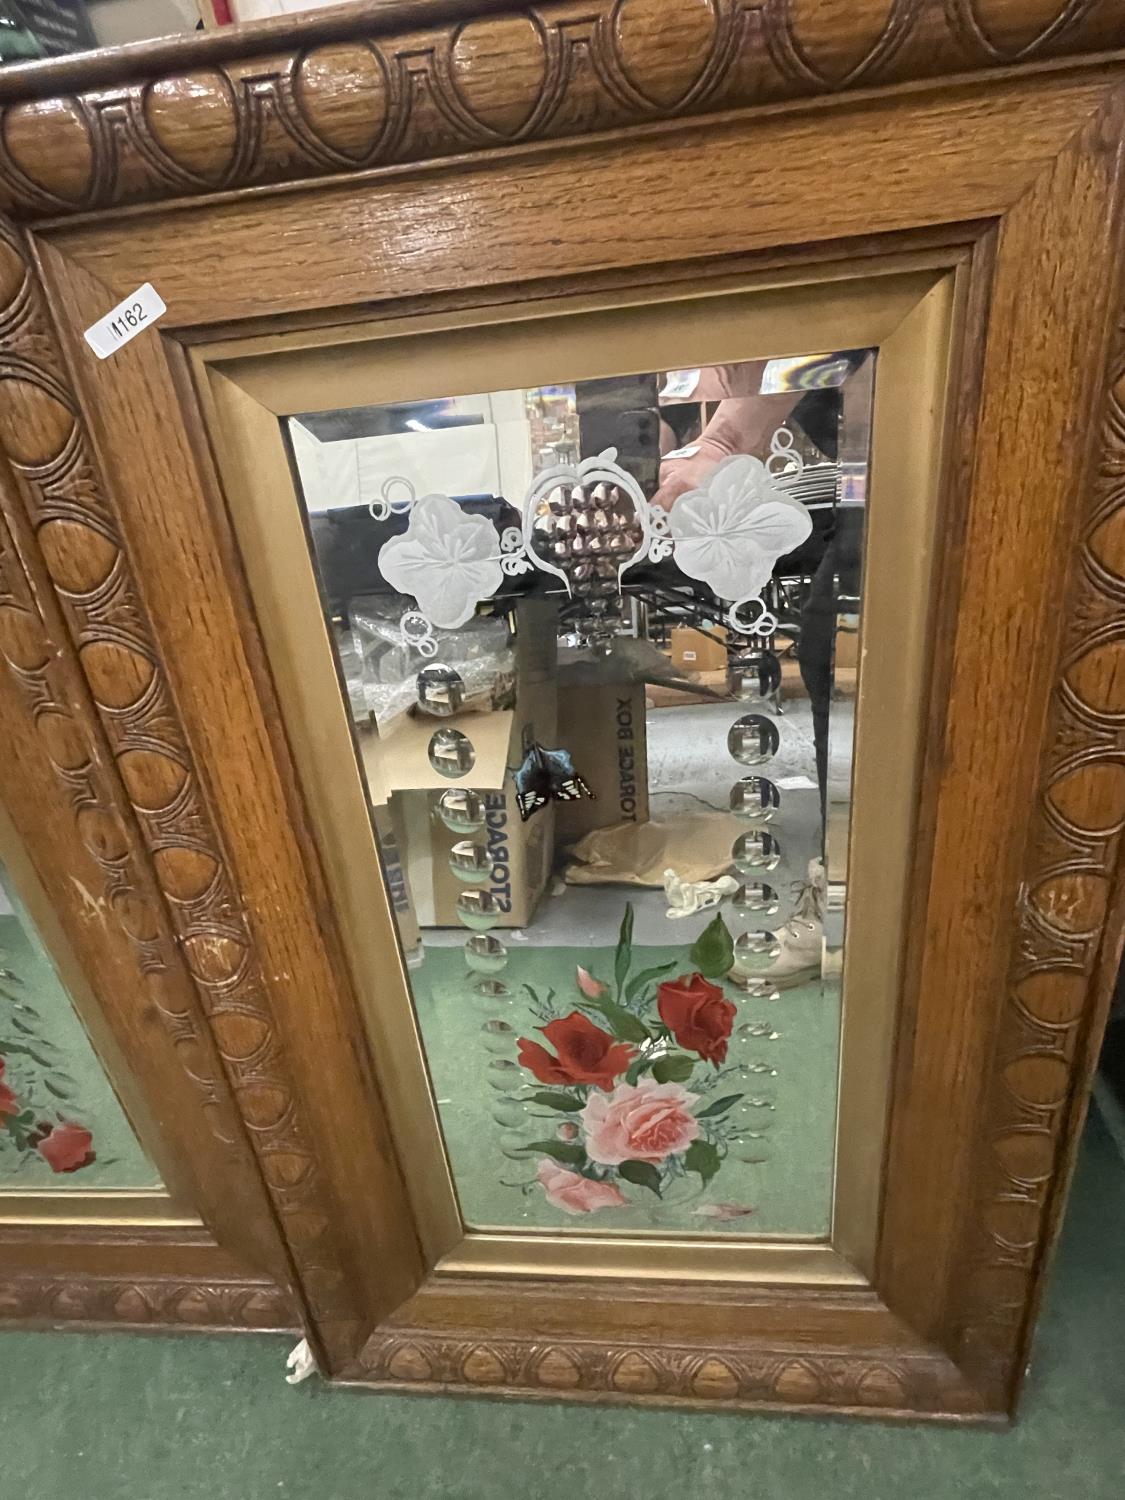 TWO OAK FRAMED DECORATIVE MIRRORS WITH FLOWERS AND BUTTERFLIES 20" X 33" - Image 4 of 6